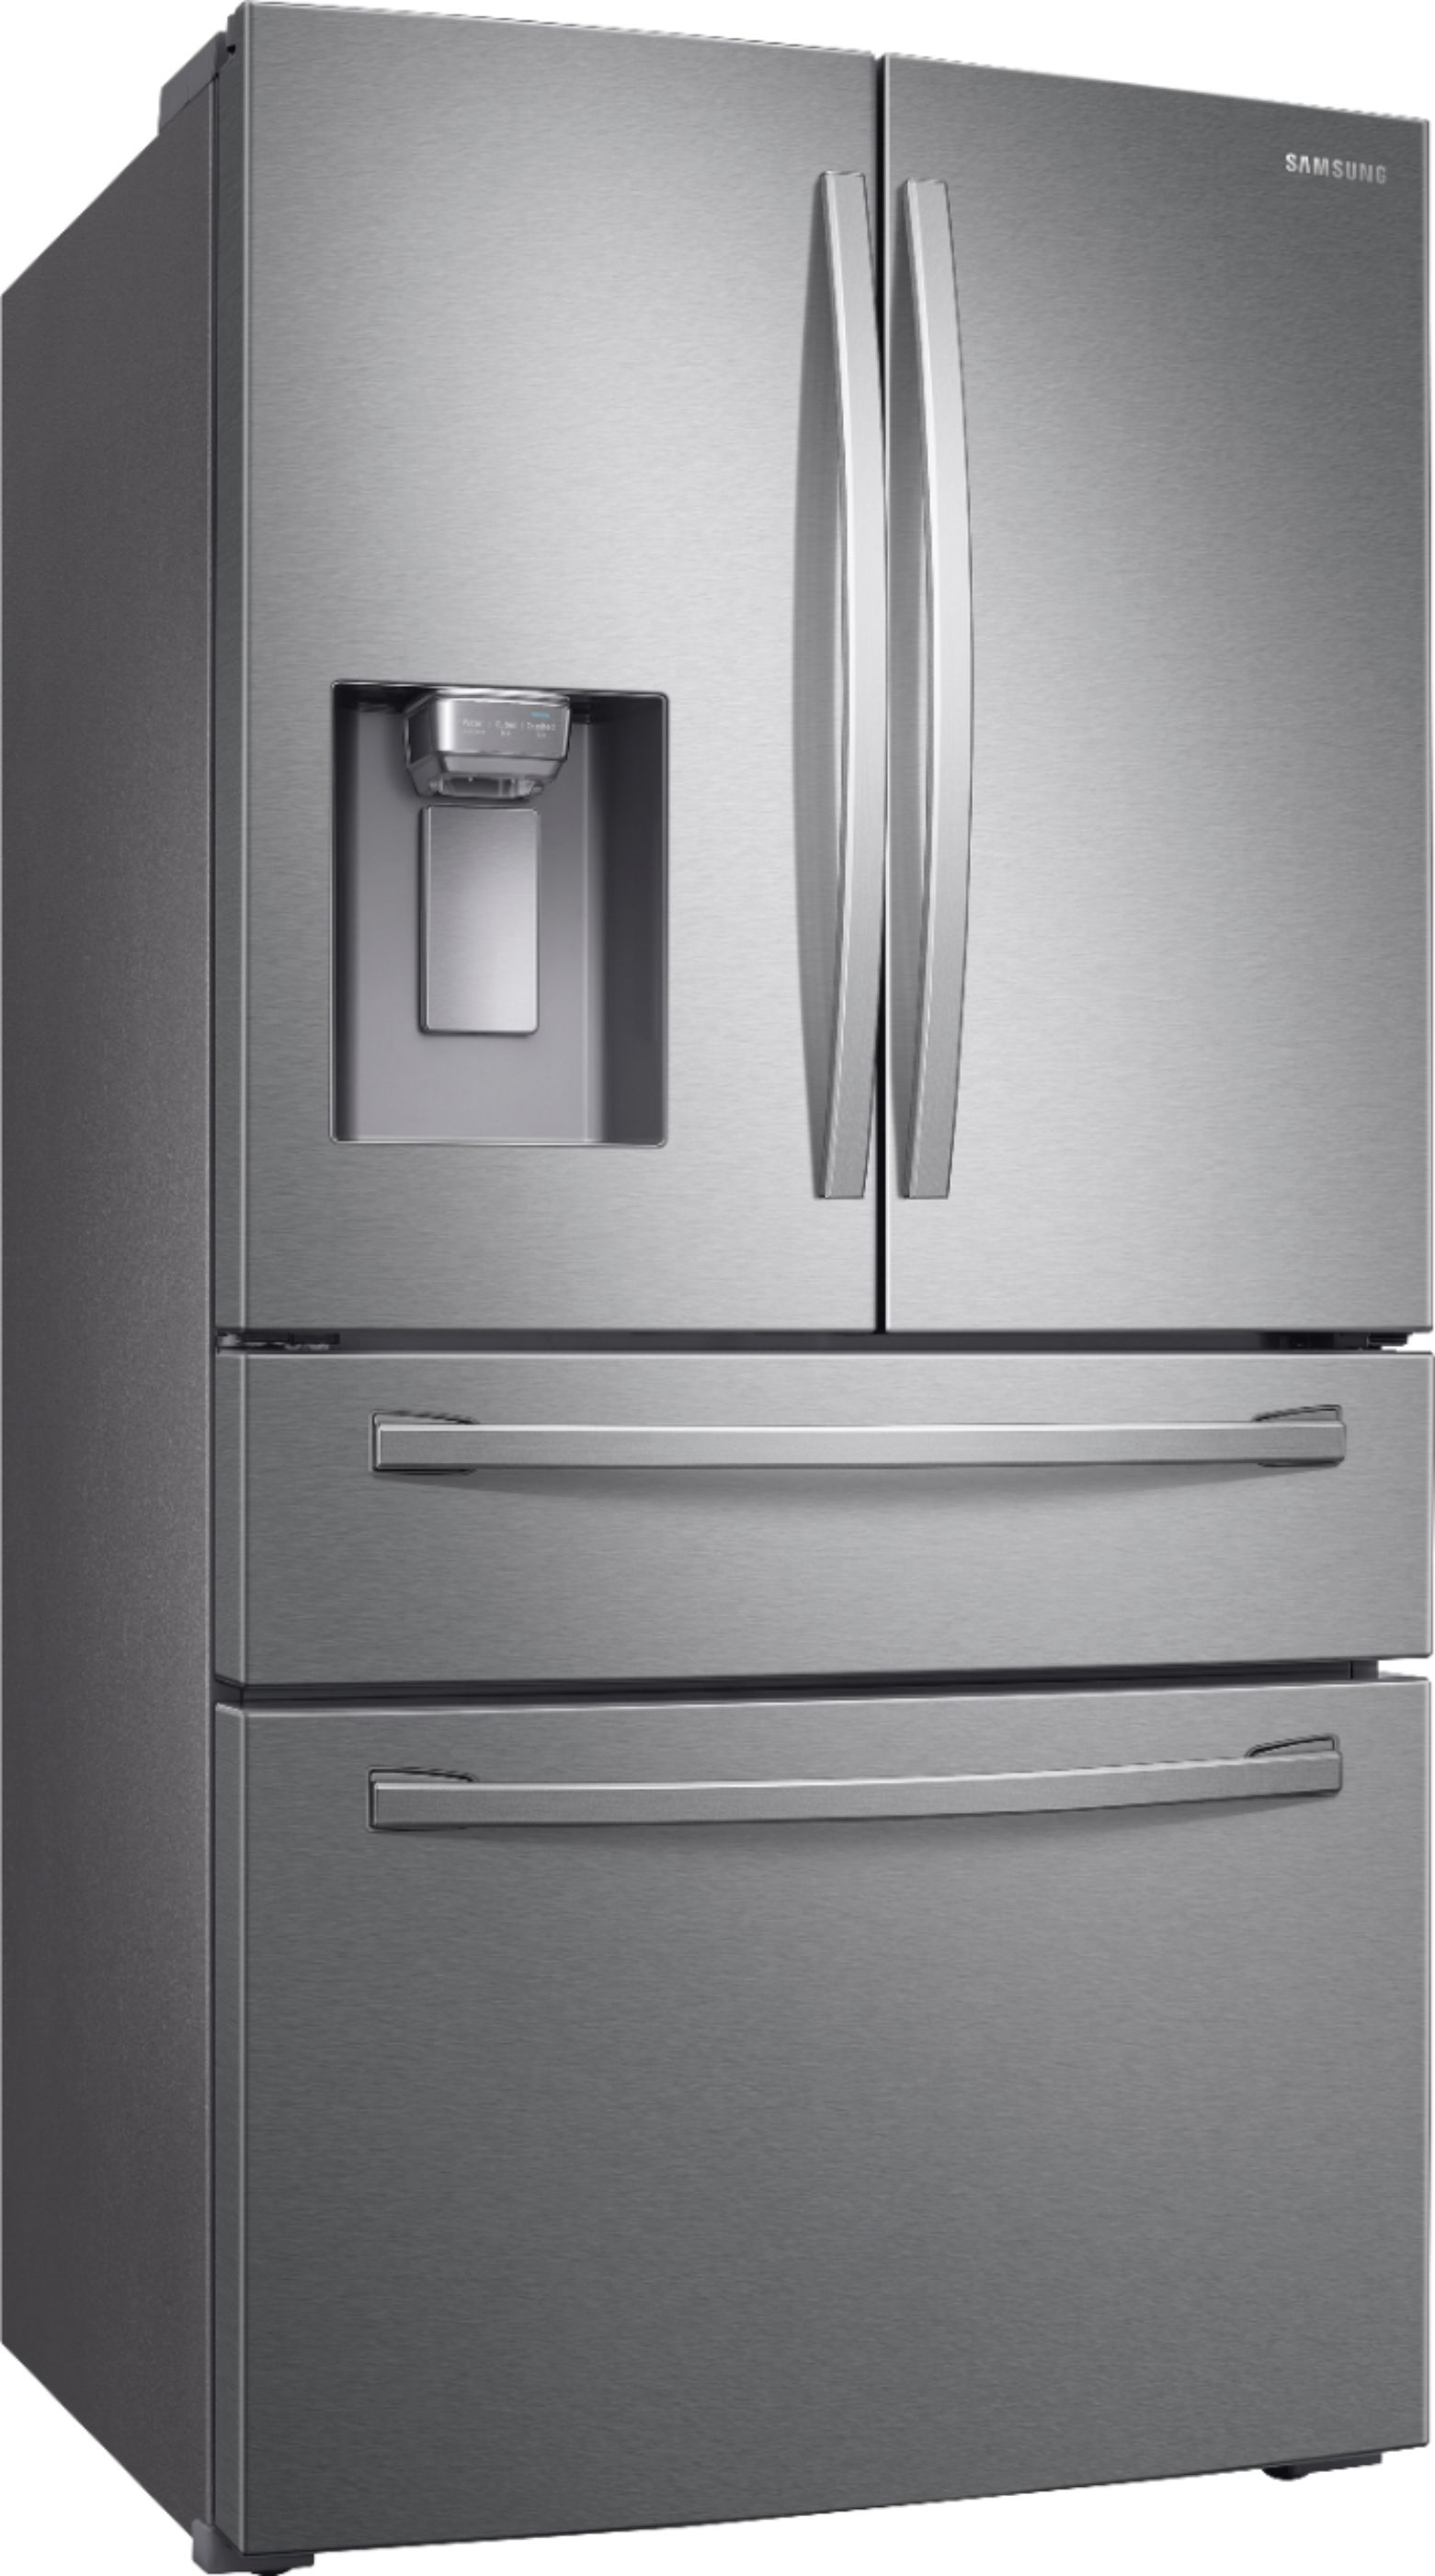 Angle View: KitchenAid - 25.8 Cu. Ft. 5-Door French Door Refrigerator - Stainless Steel